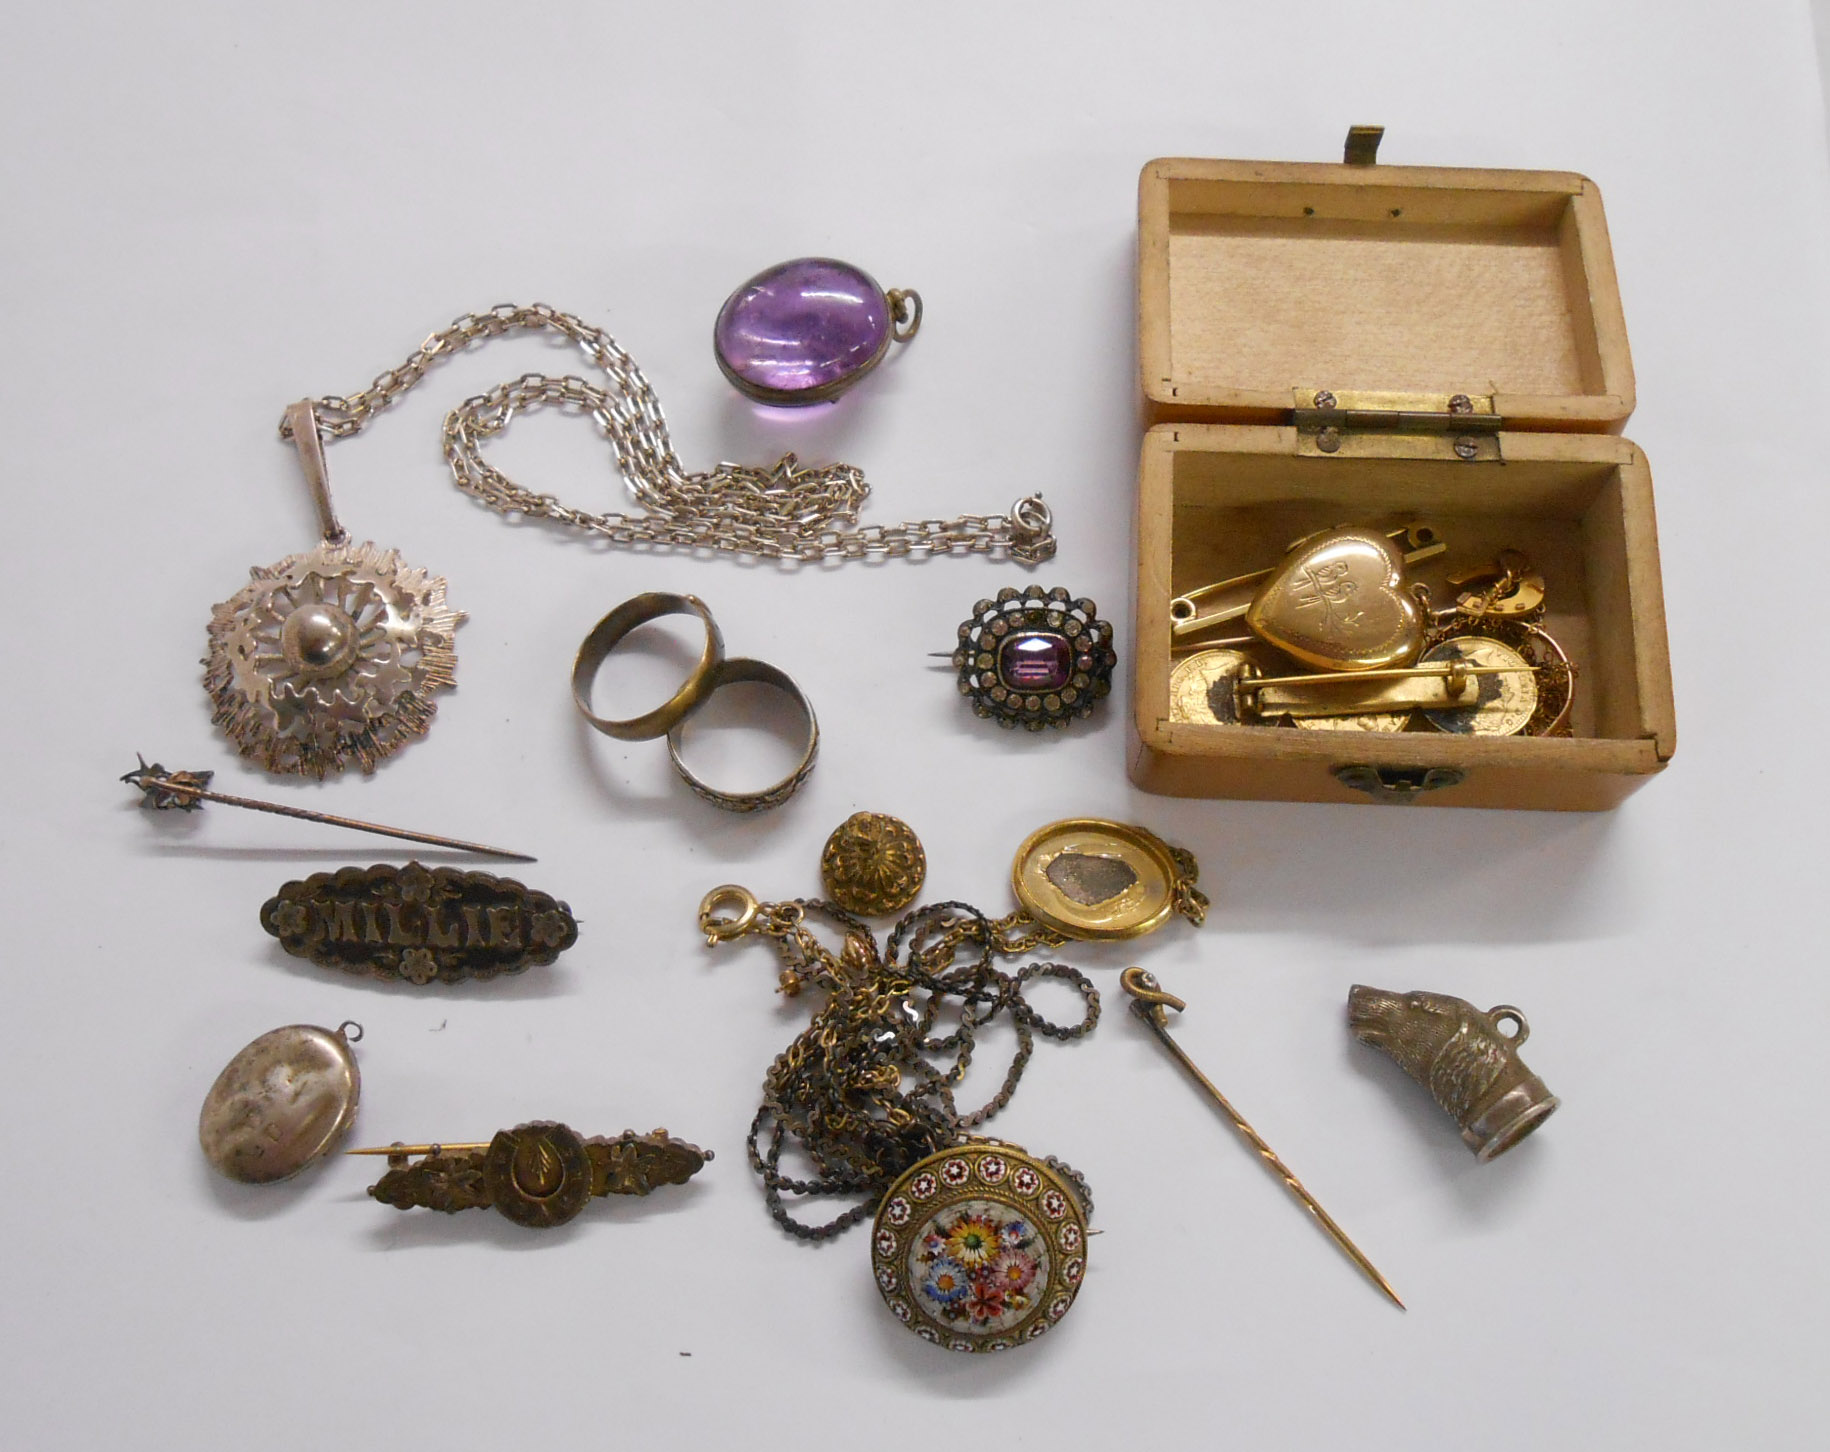 A small quantity of good quality costume jewellery including some silver - sold with a trinket box